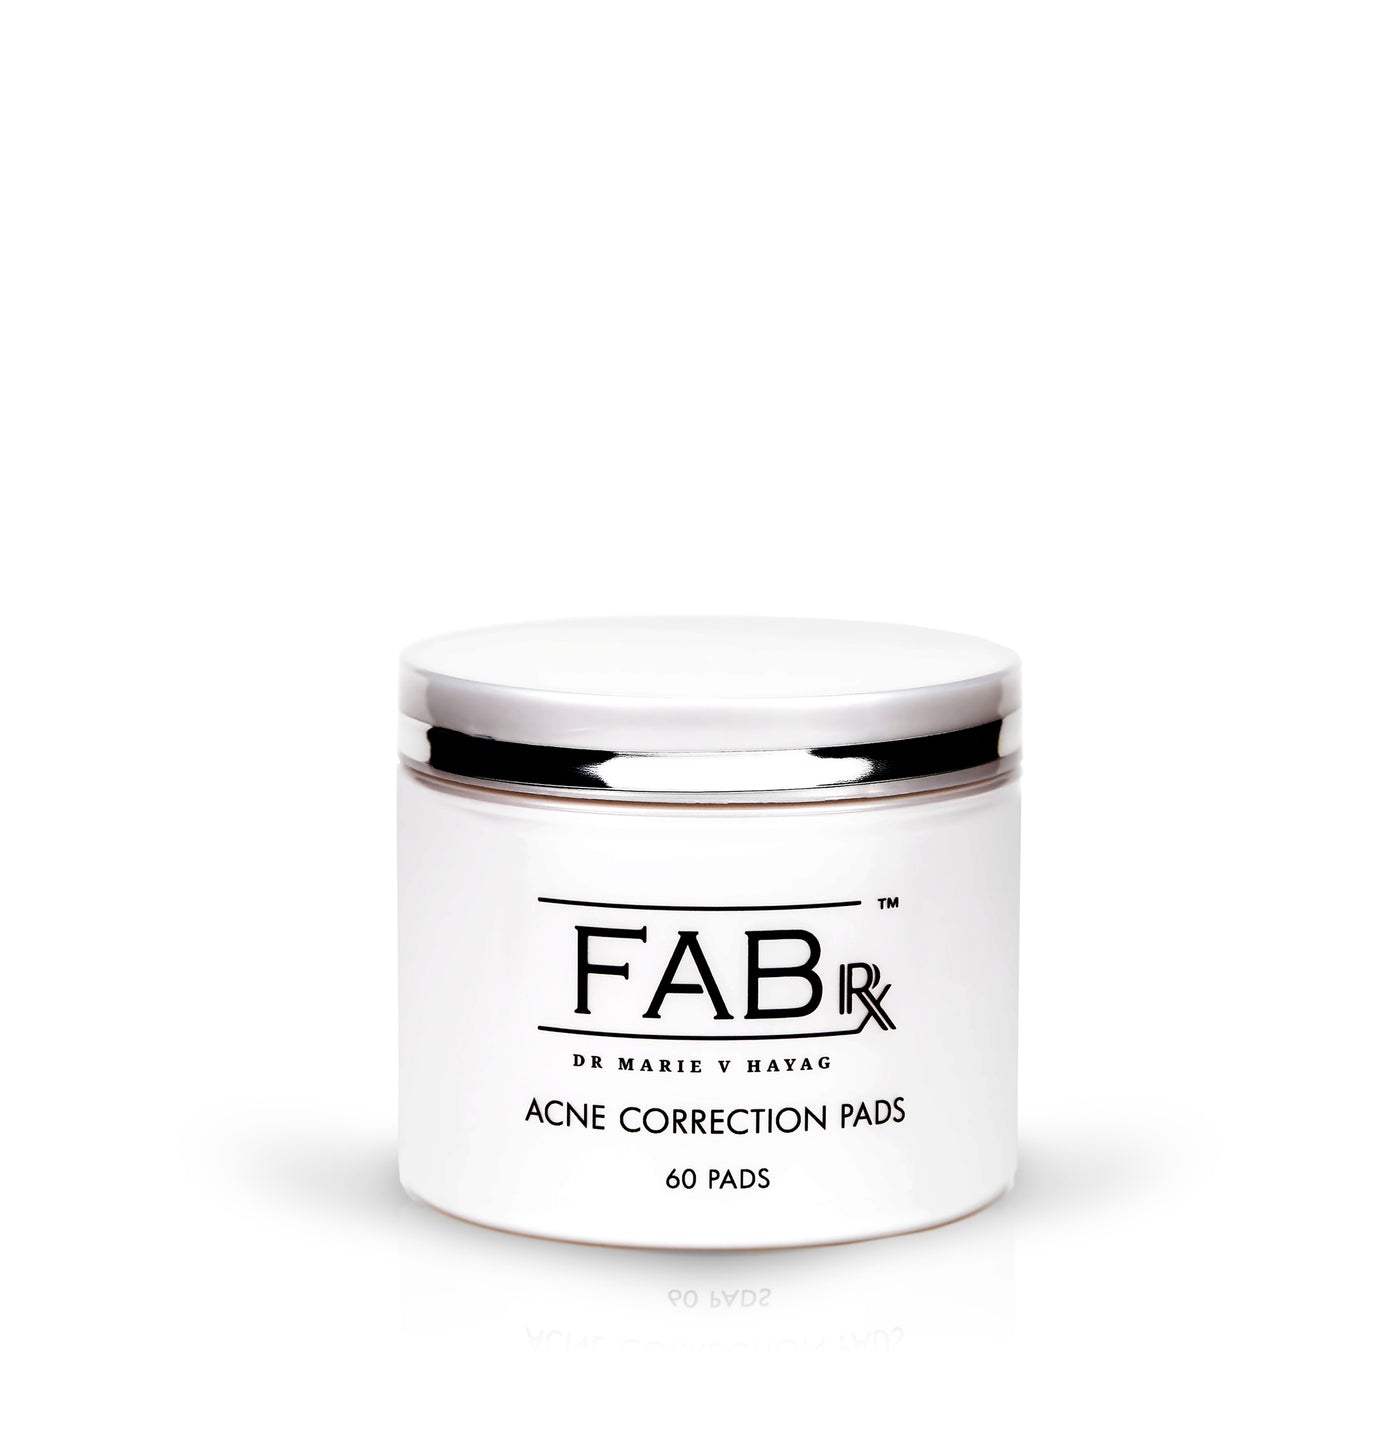 FABrx Acne Correction Pads